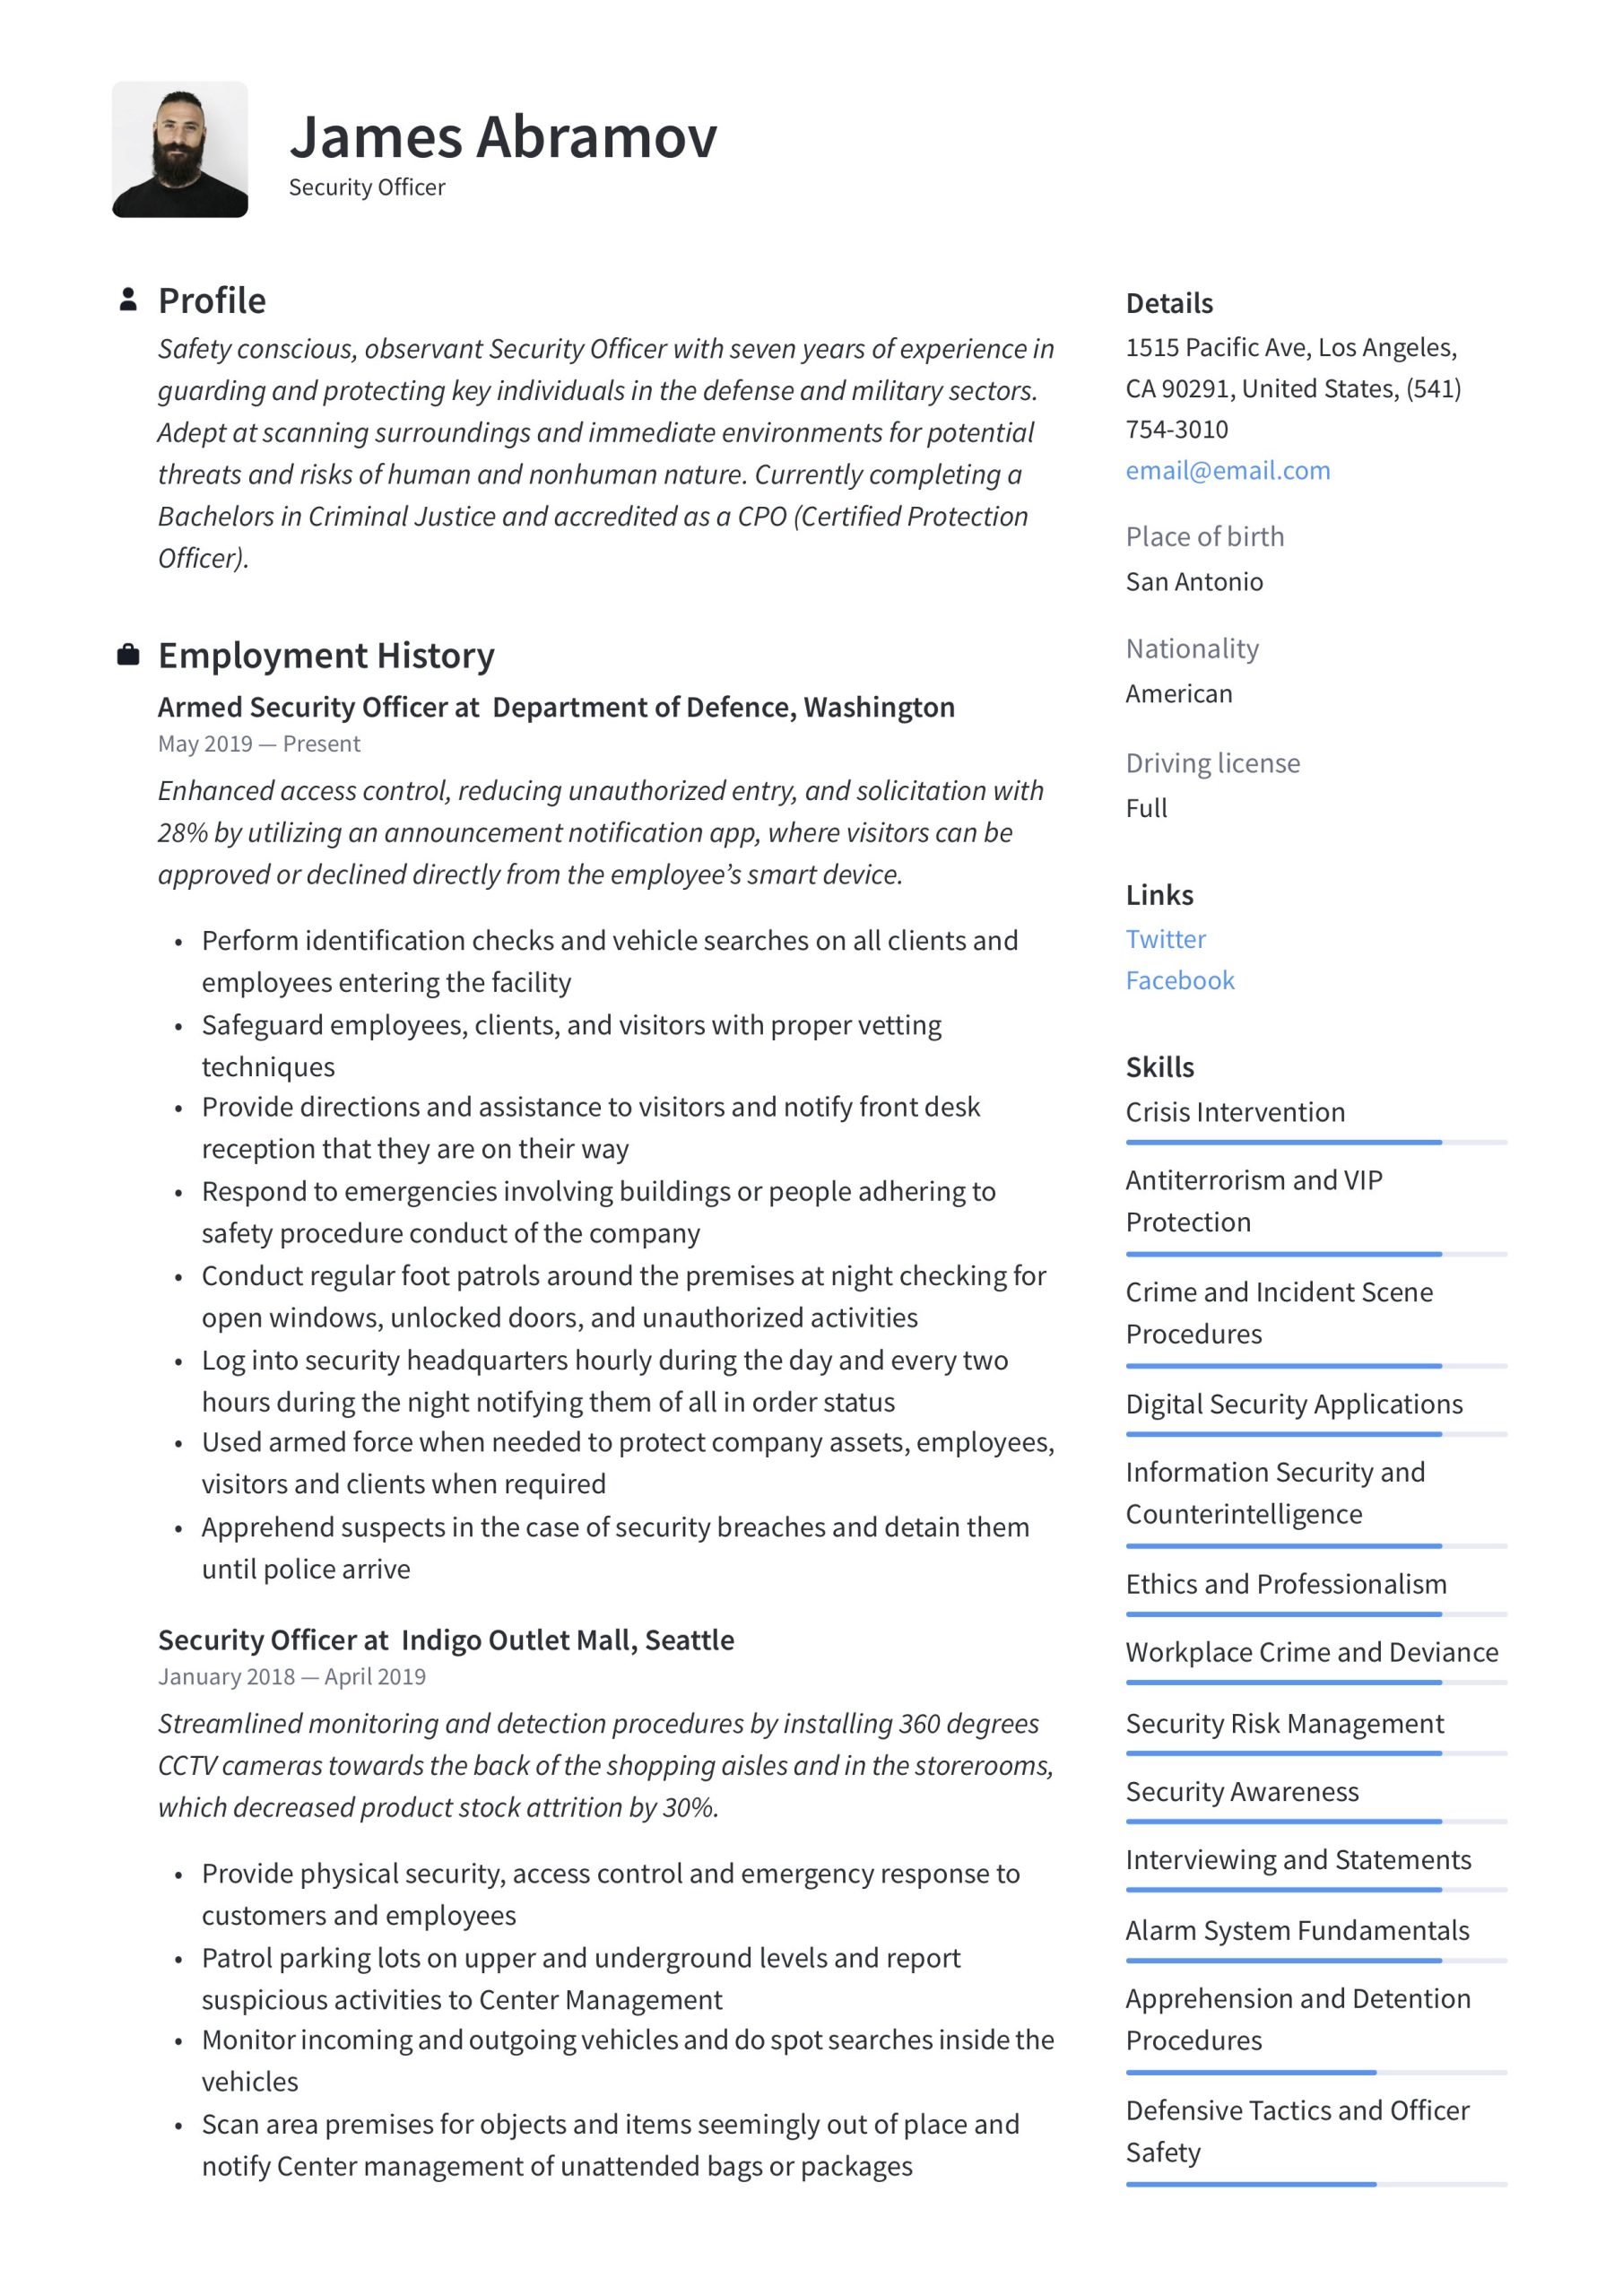 Information System Security Officer Sample Resume Security & Protective Services – Resume Examples 2022